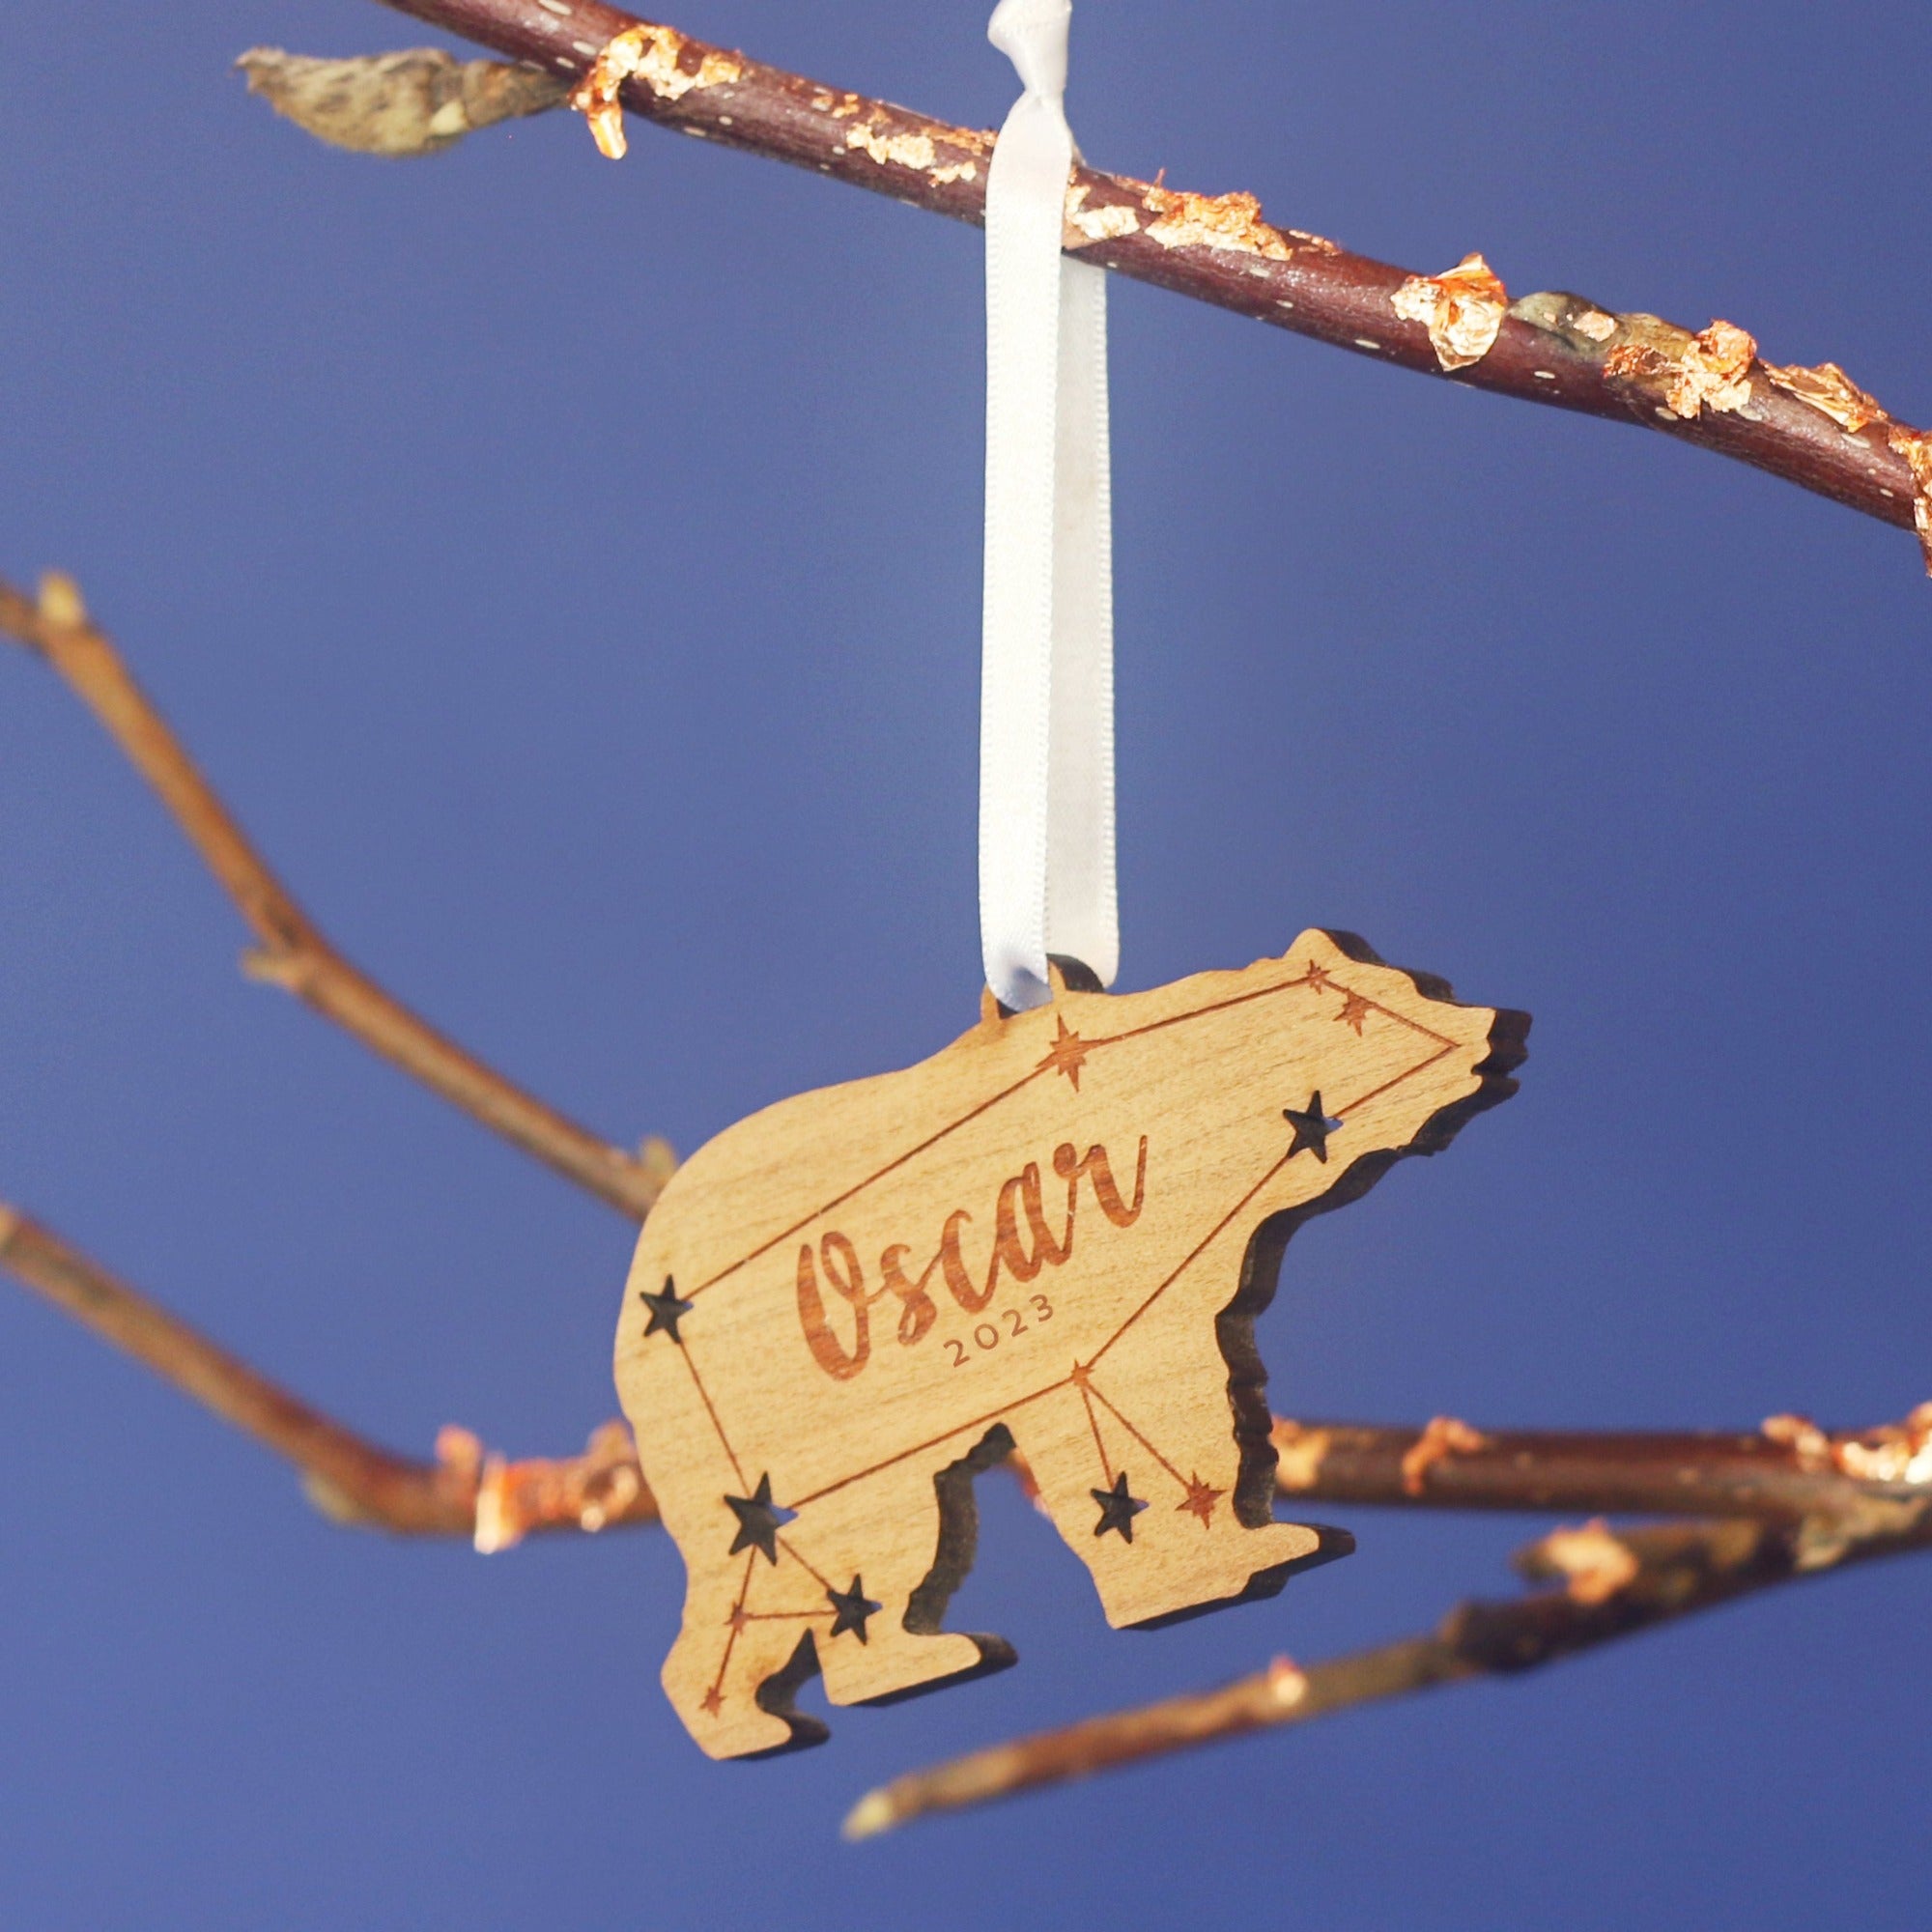 Personalised wooden Christmas decoration in the shape of a polar bear